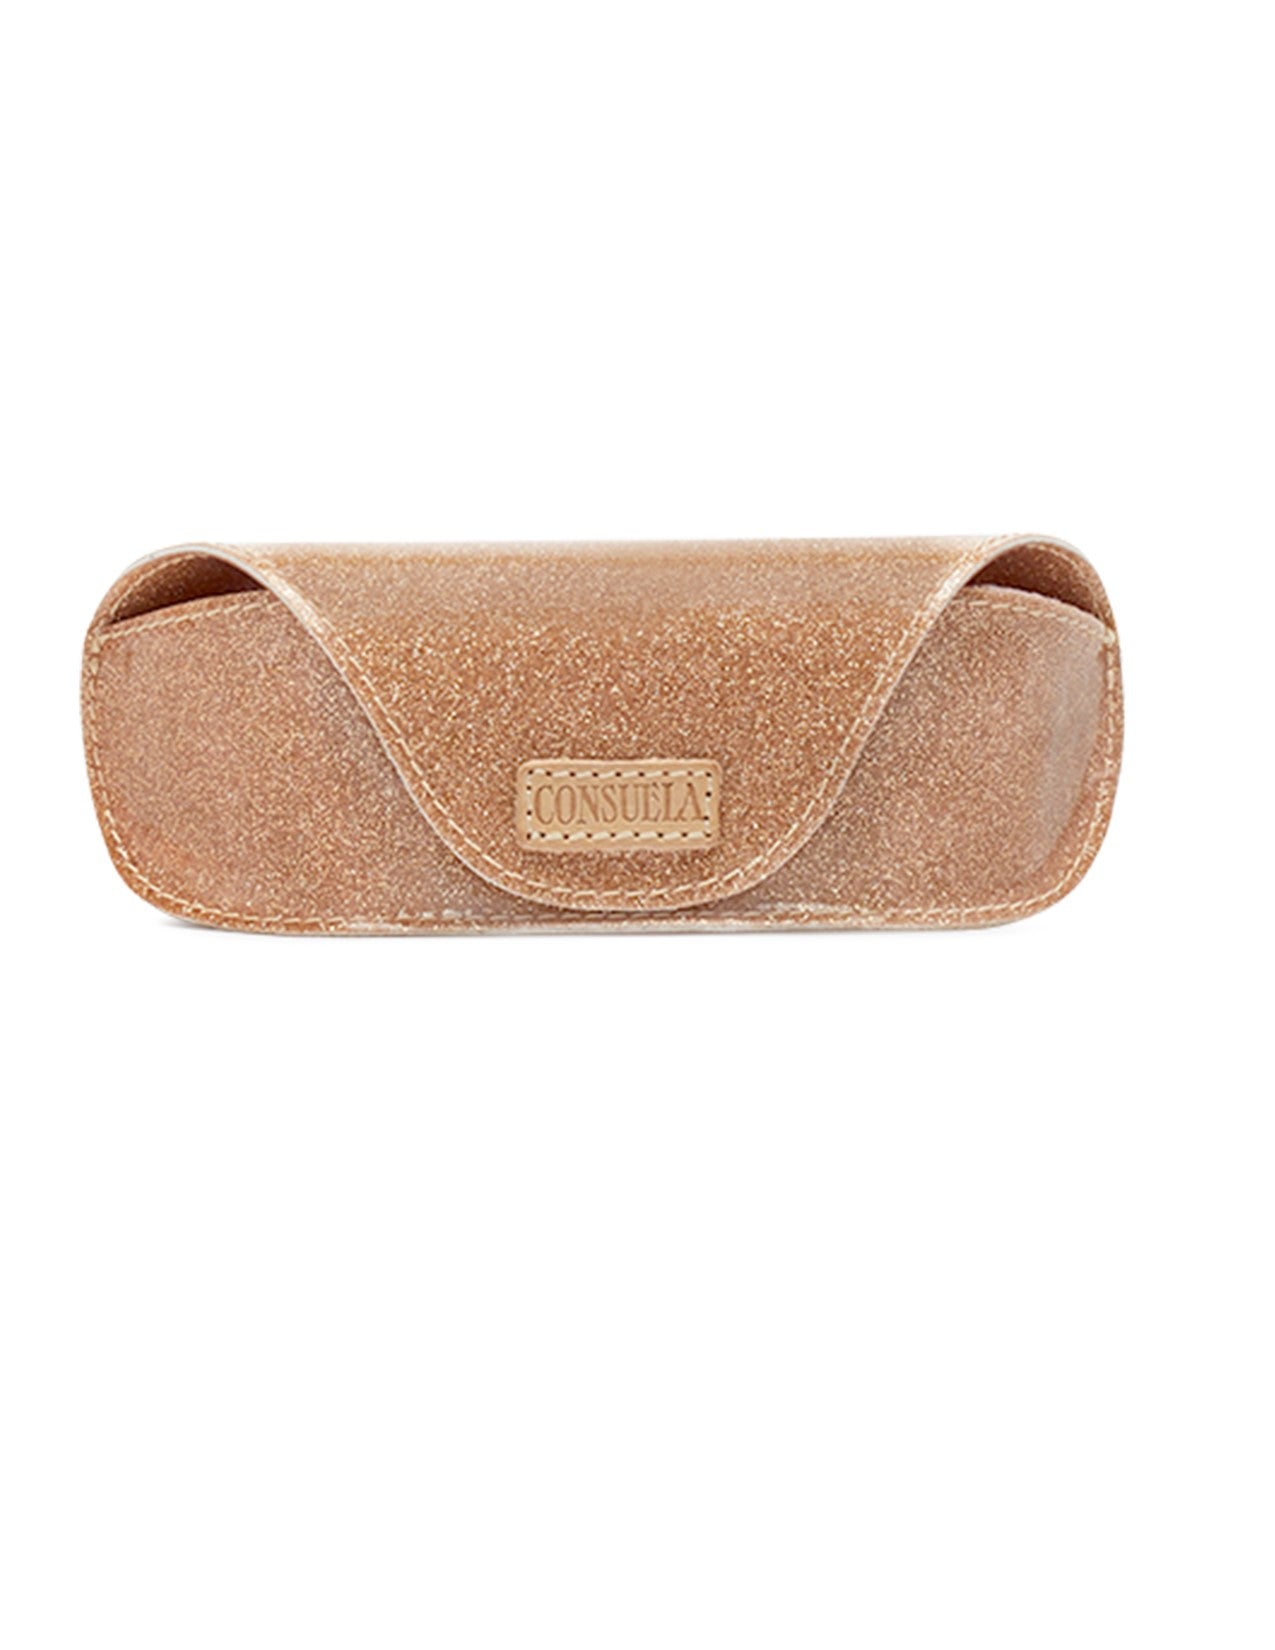 Consuela Sunglass Case - Lee-Consuela Bags-Consuela-Market Street Nest, Fashionable Clothing, Shoes and Home Décor Located in Mabank, TX